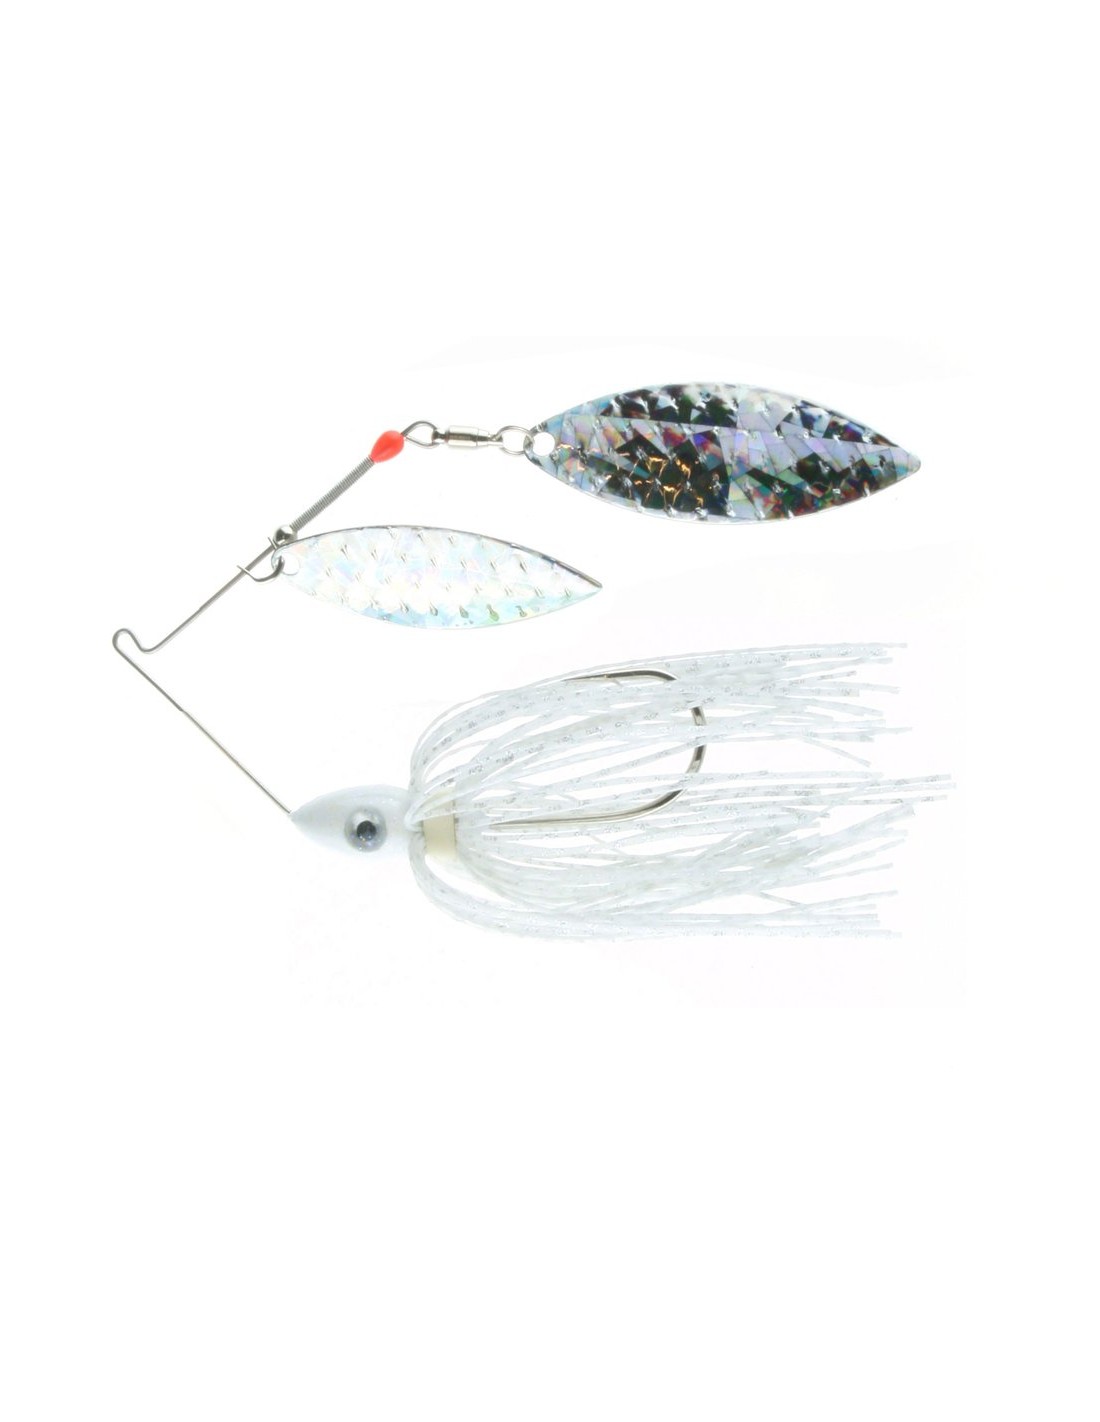 Pulsator Shattered Glass Spinnerbait Silver Flake Shad Nichols Lures 